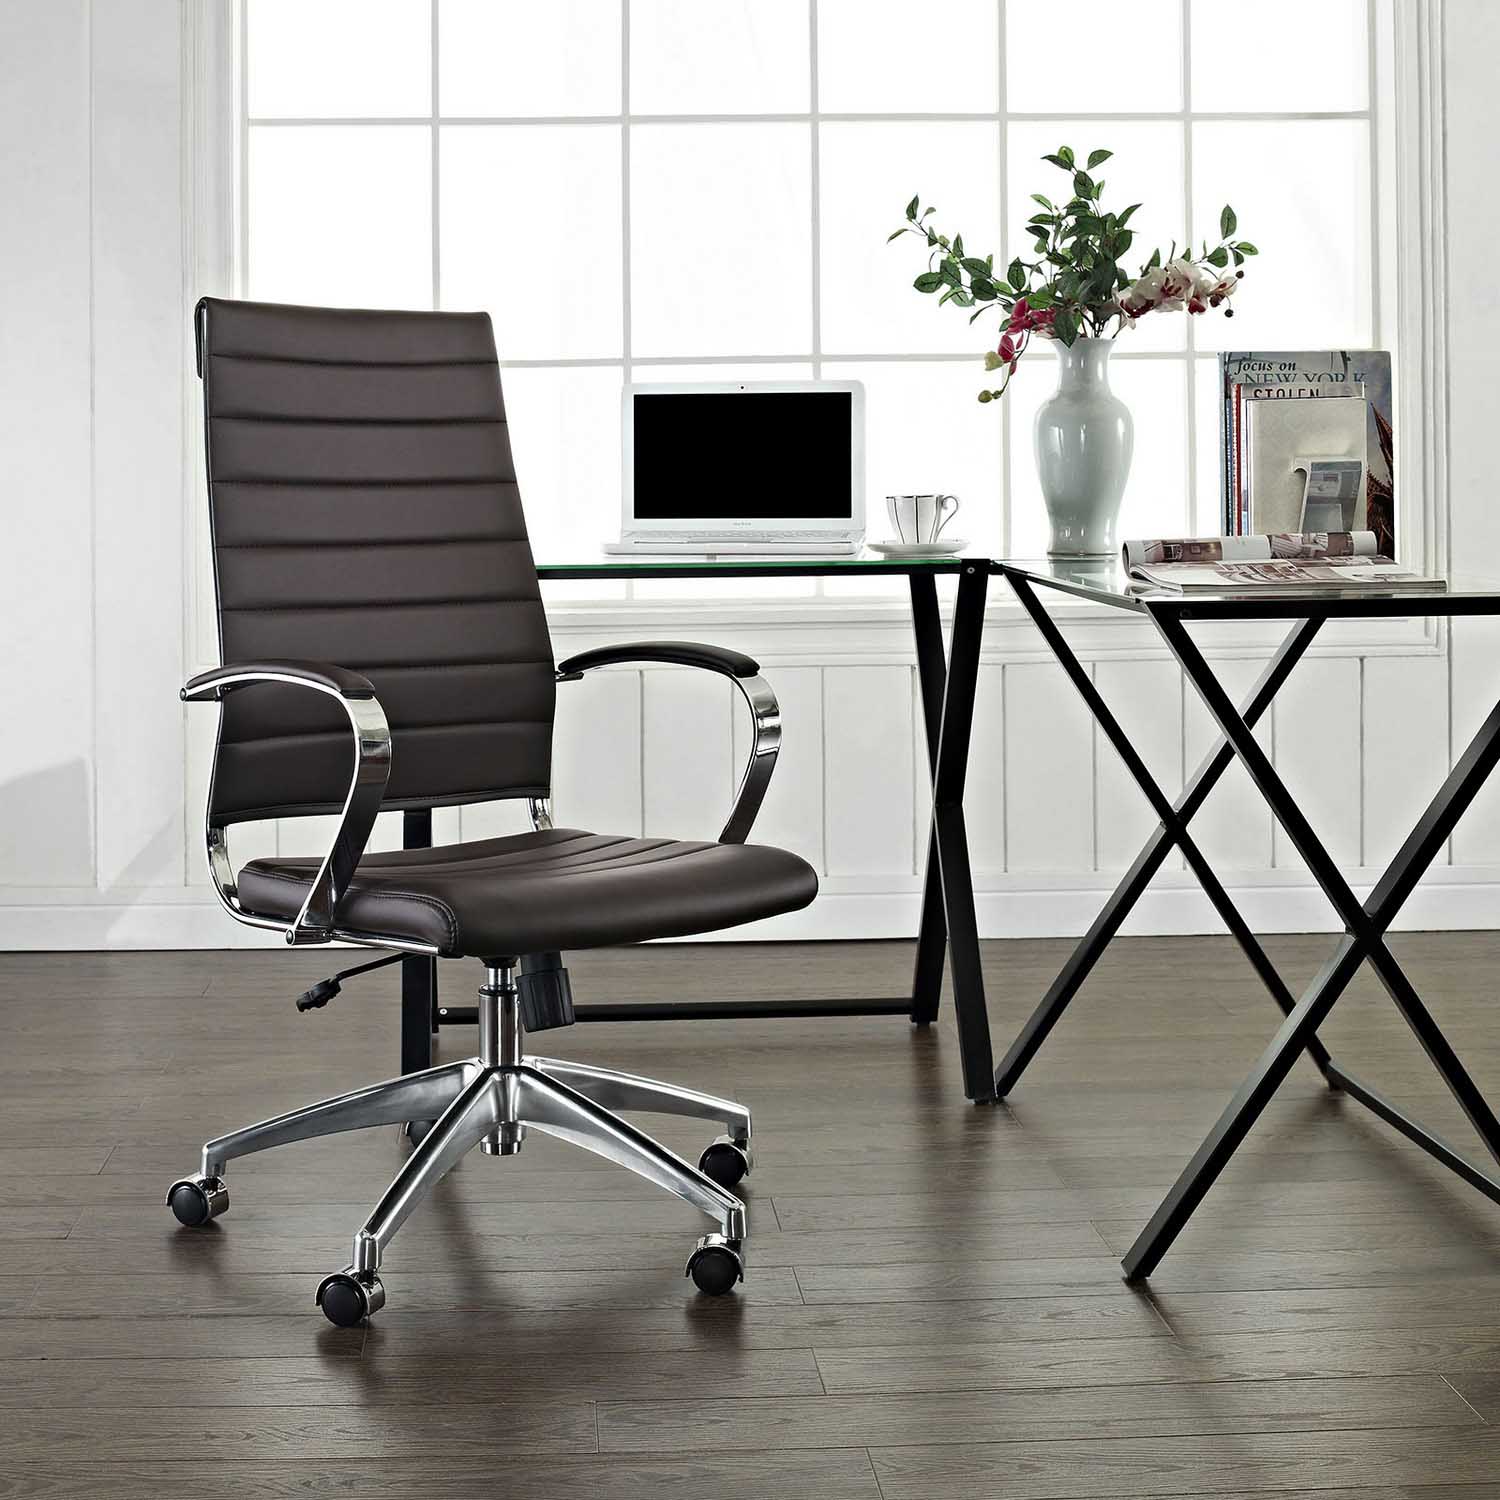 Modway Jive Highback Office Chair - Brown